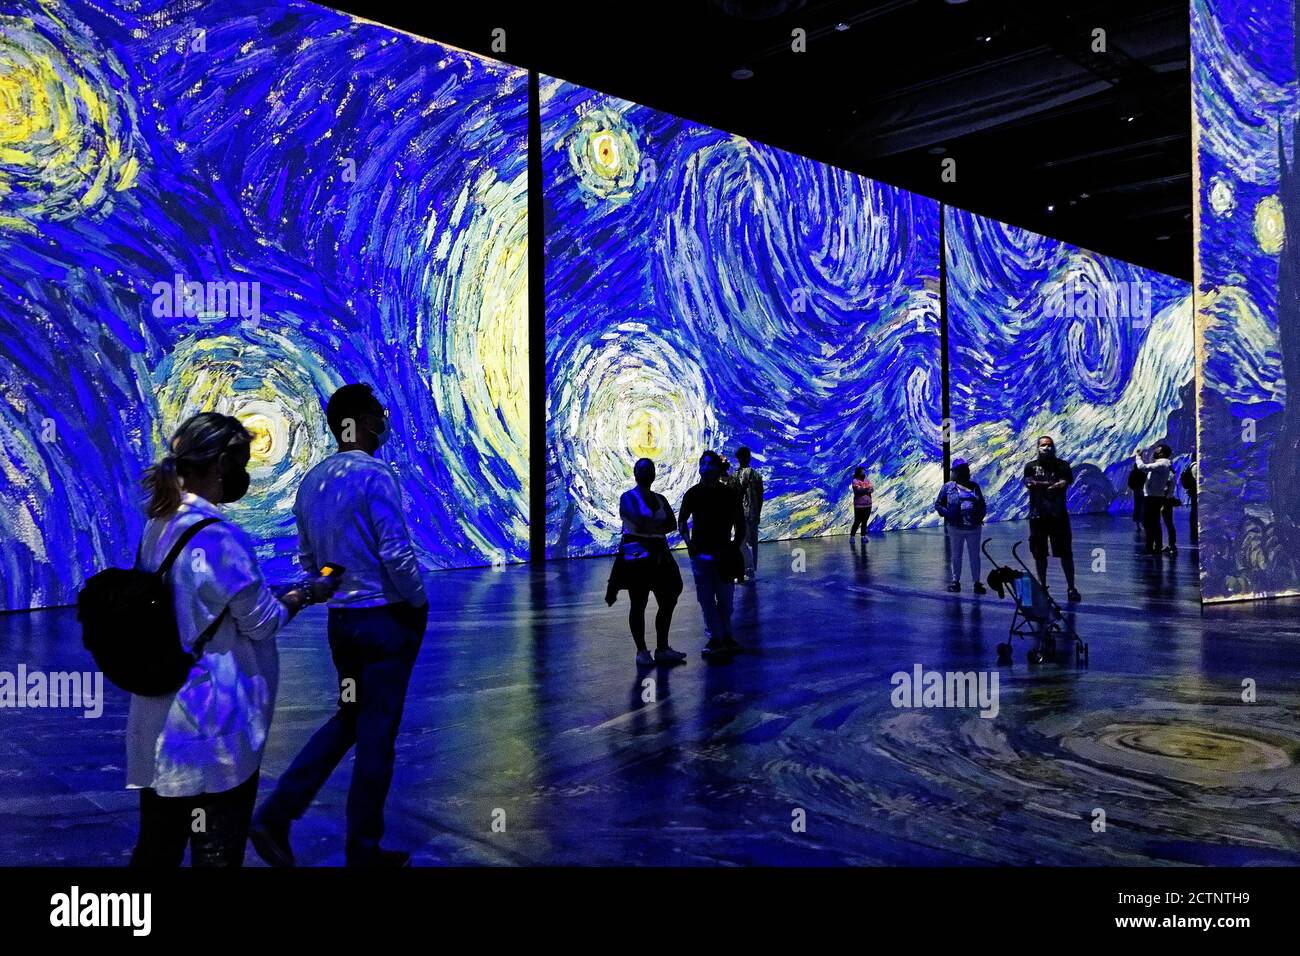 People at the Imagine Van Gogh immersive exhibition in Quebec City, Canada Stock Photo